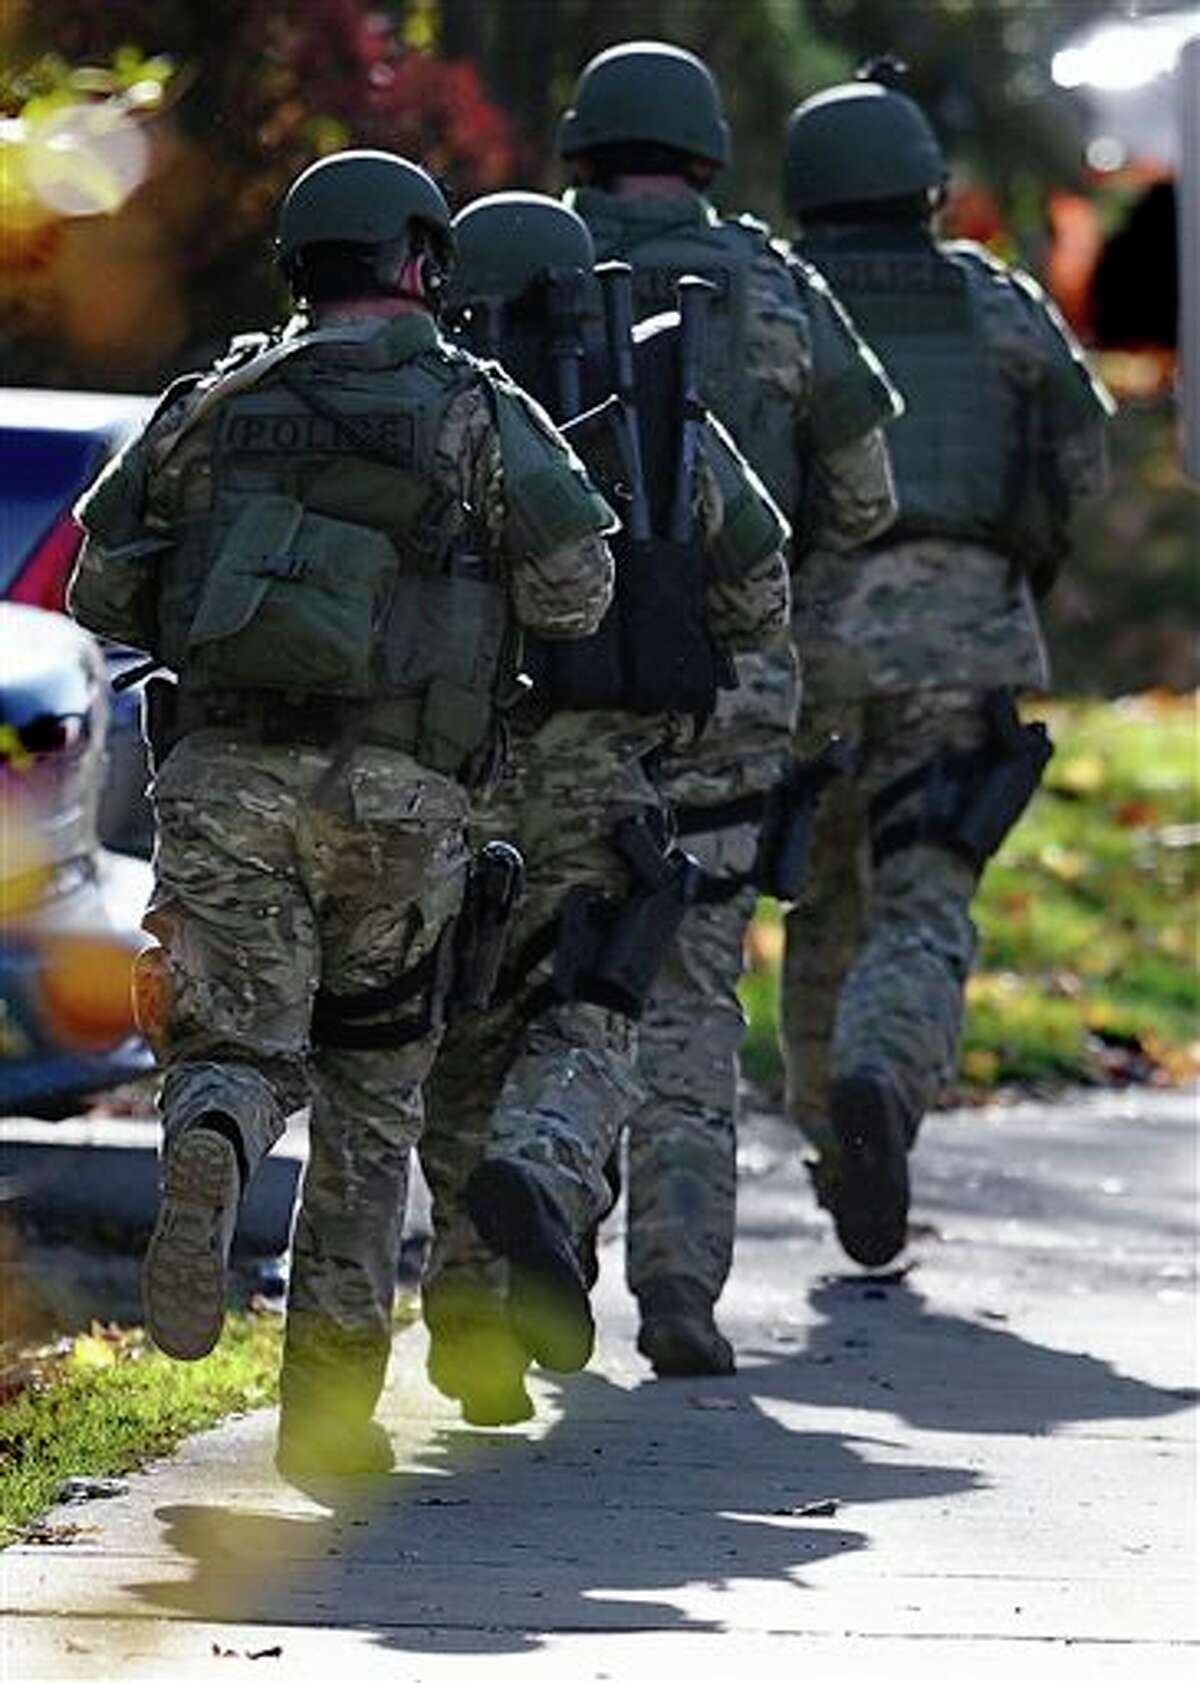 SWAT move in a line on the campus of Central Connecticut State University, Monday, Nov. 4, 2013, in New Britain, Conn. An armed man was spotted on the campus of Central Connecticut State University, prompting a schoolwide lockdown and warnings for students to stay away from windows as police SWAT teams swarmed the area. University spokesman Mark McLaughlin said, "Somebody was seen either with a gun or was thought to have a gun." 